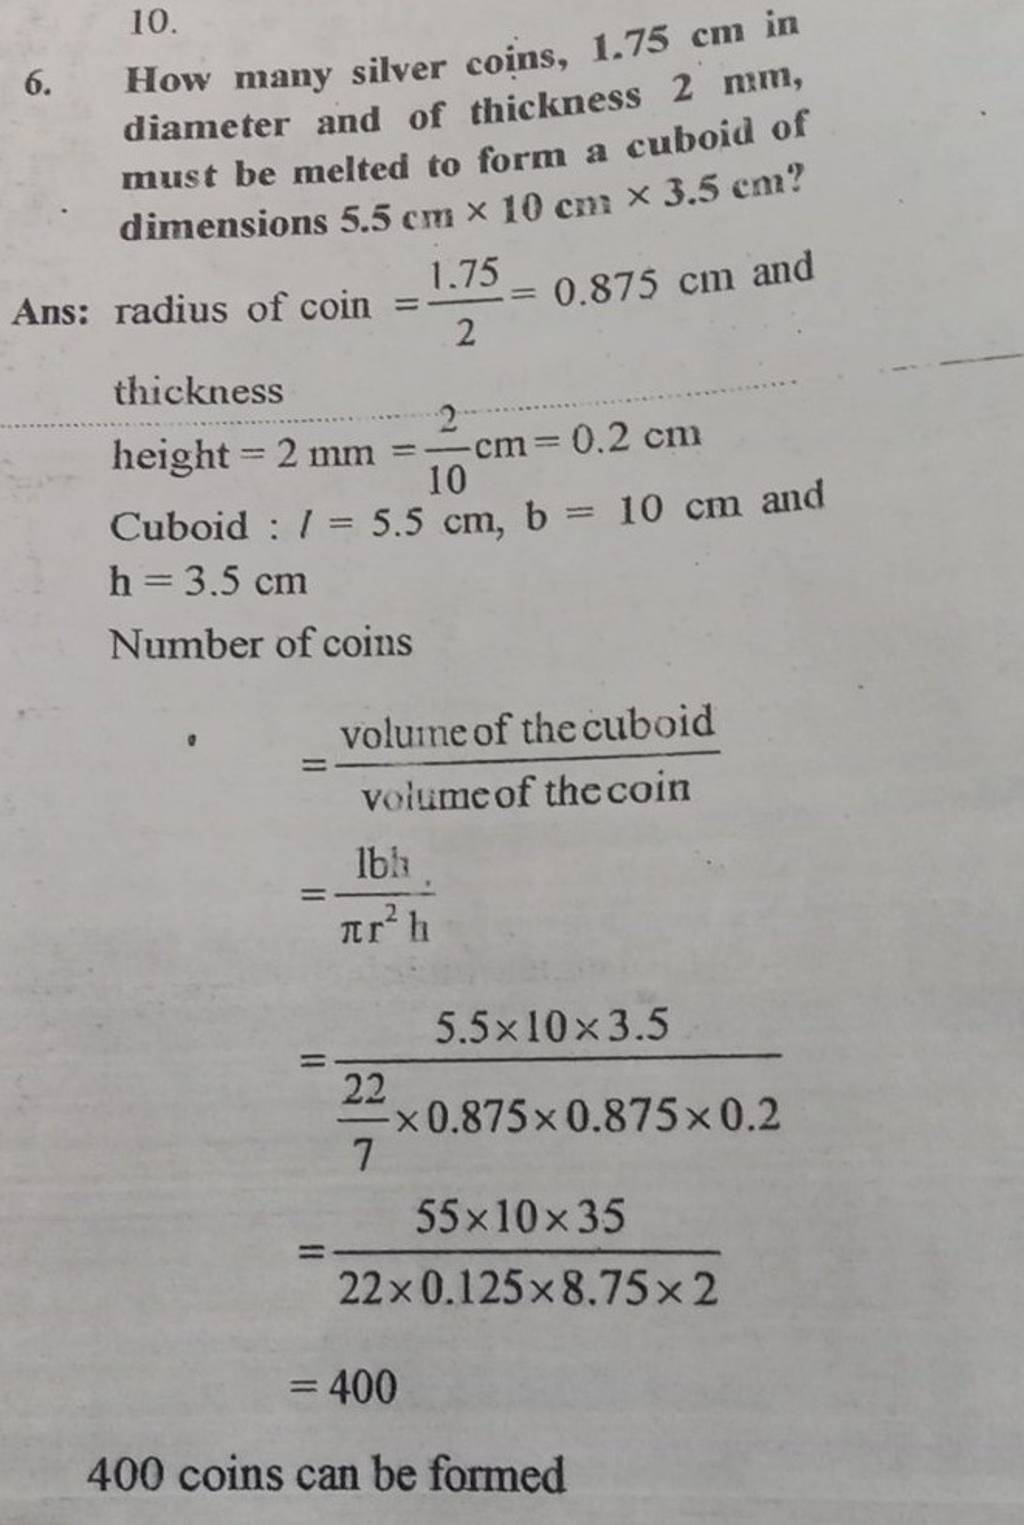 how many silver coins 1.75 cm in diameter